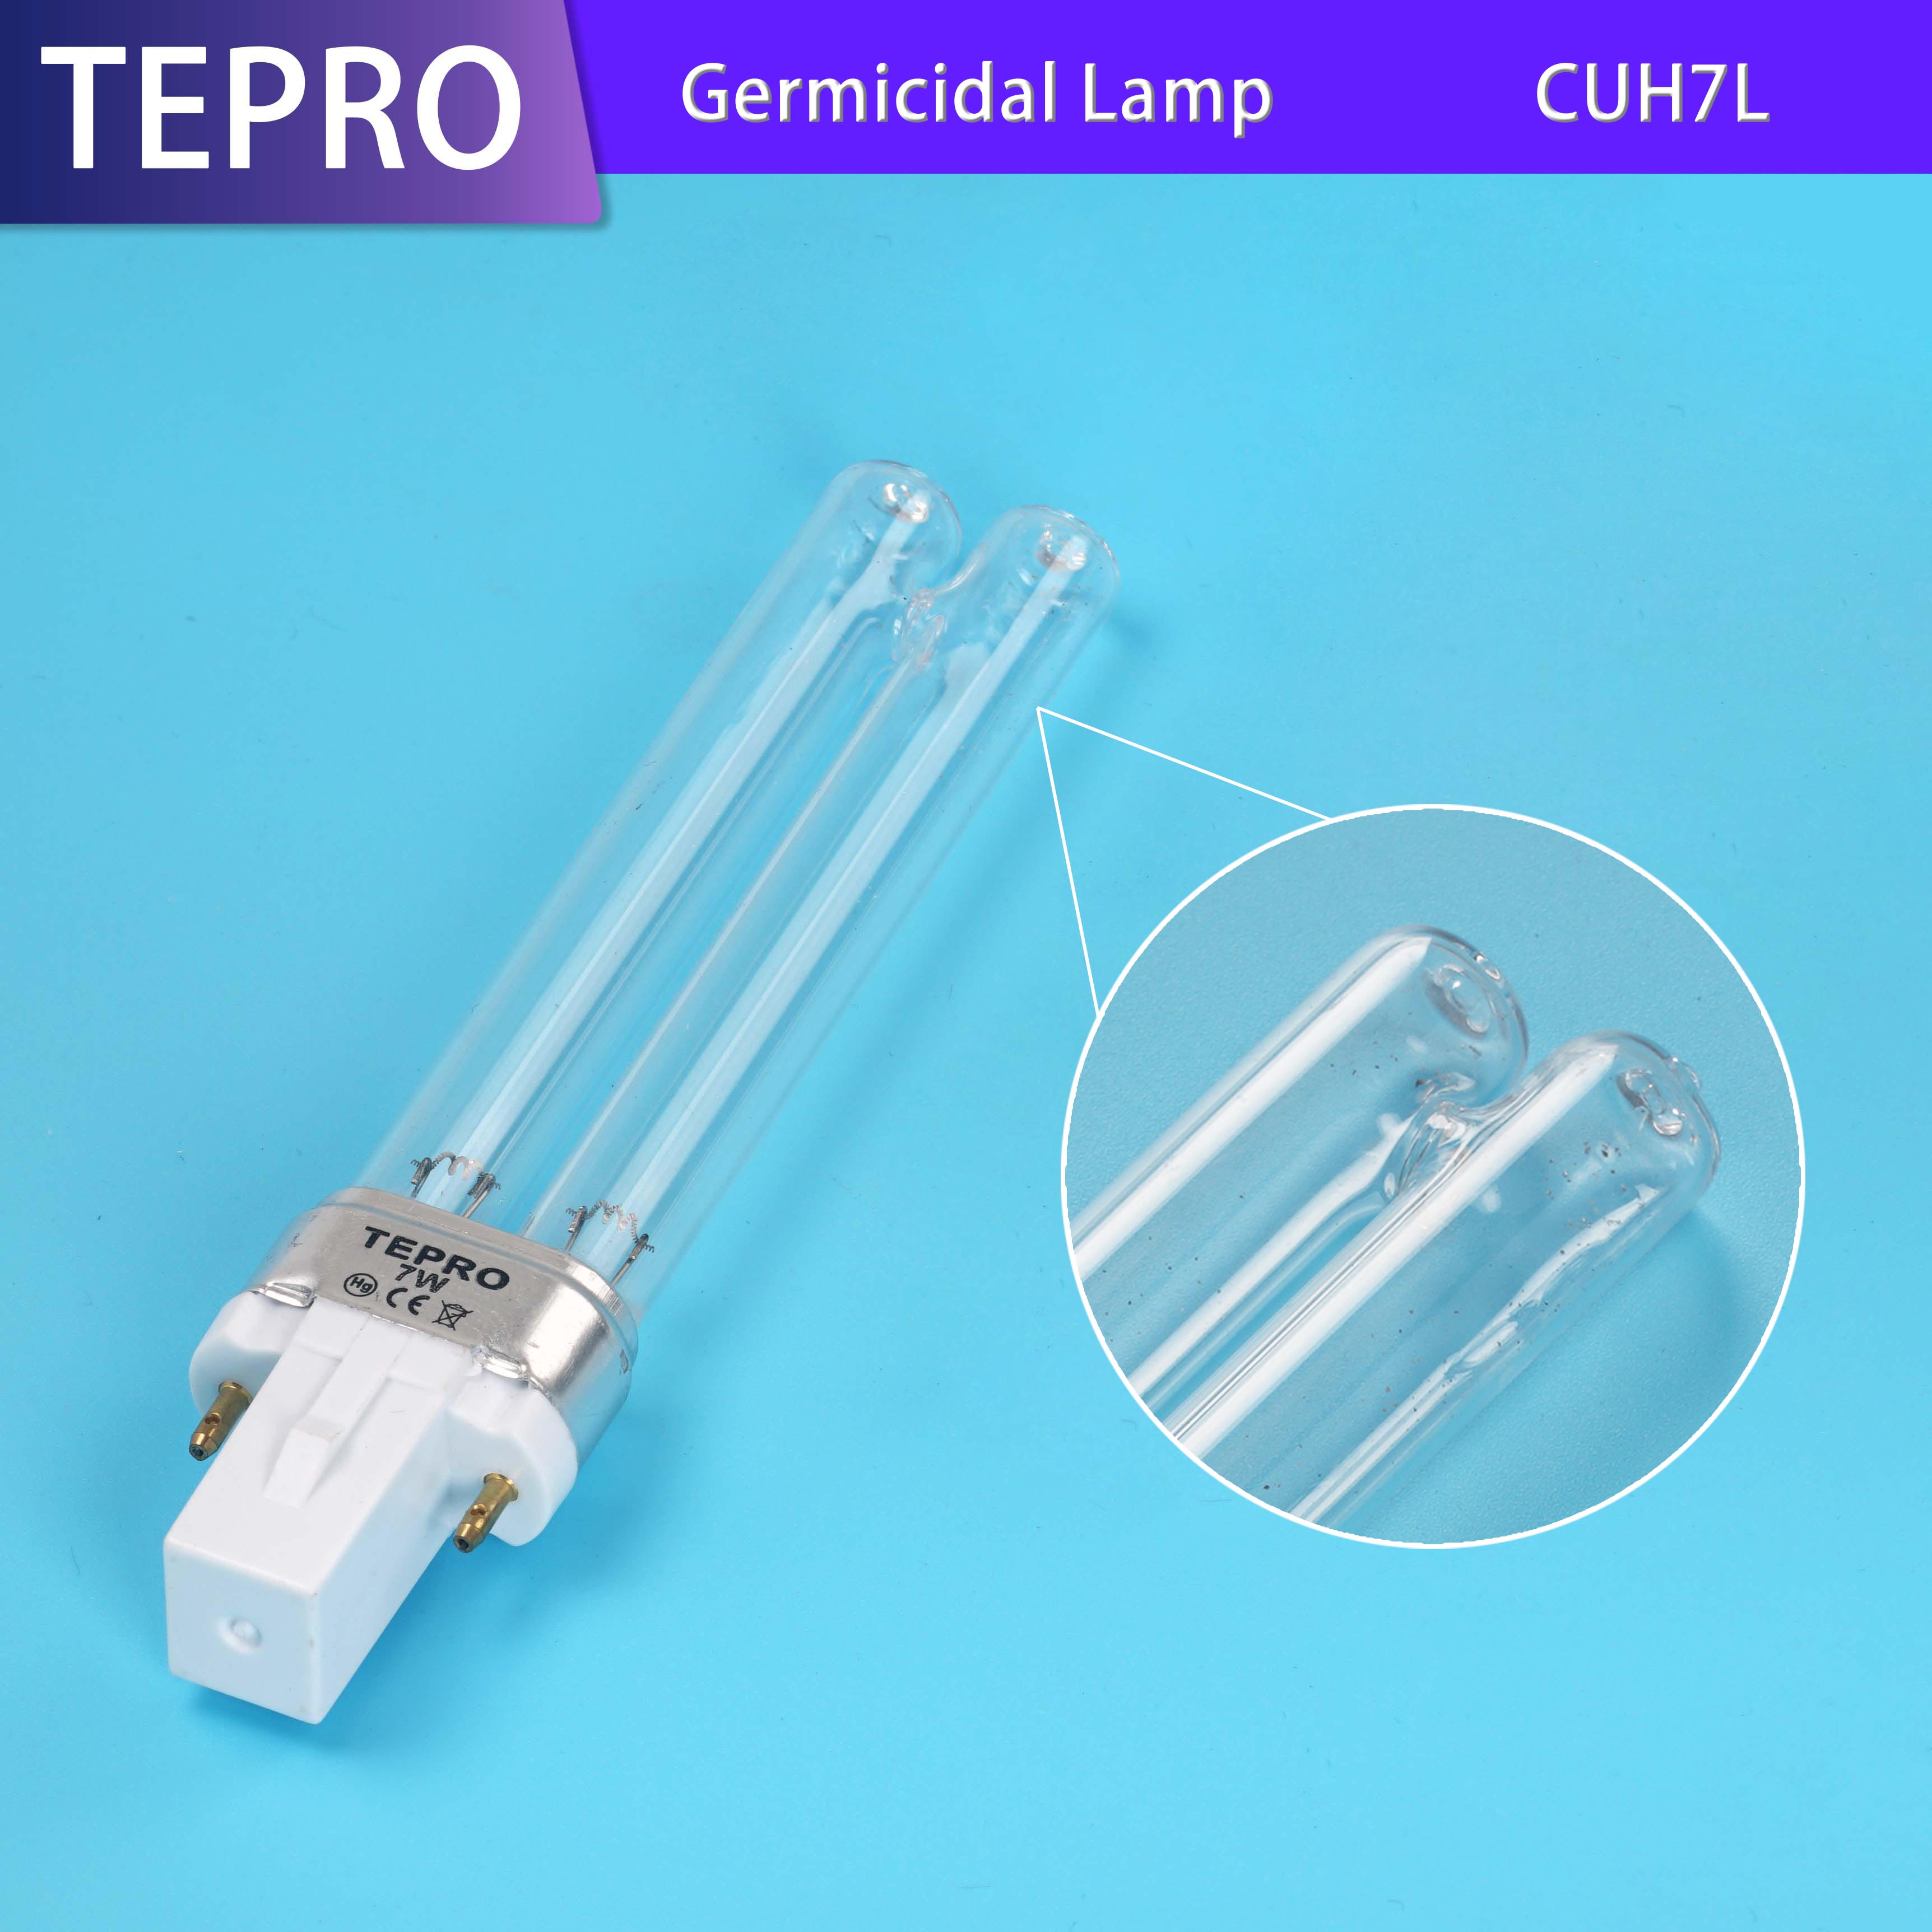 news-Tepro-Tepro small uv lamp cost brand for home-img